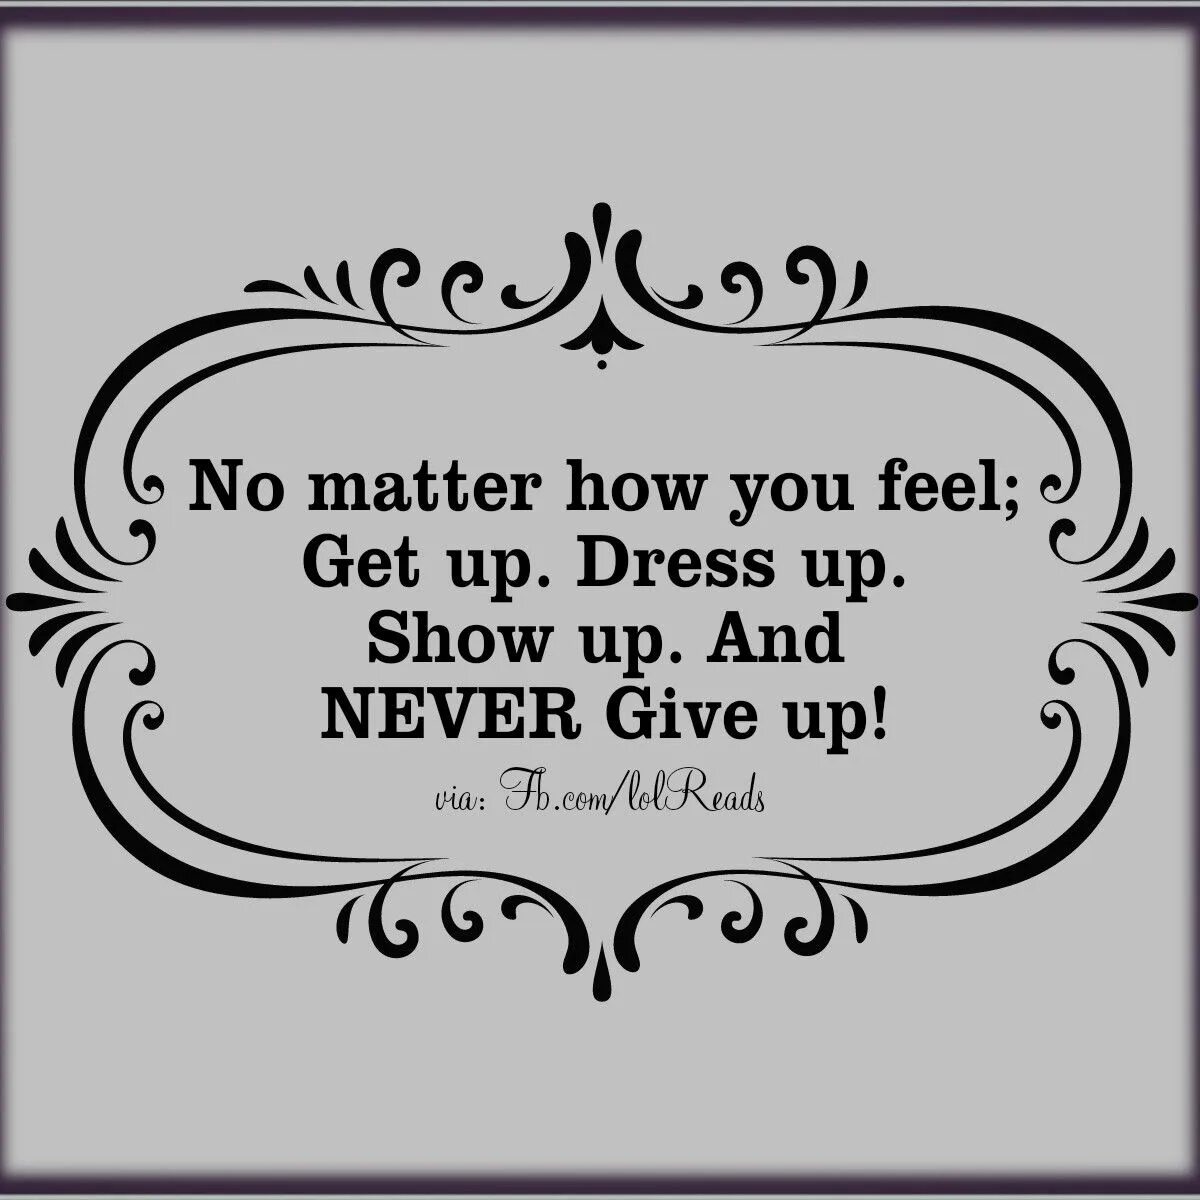 No matter how you feel get up and never give up. No matter how you feel. Never give you up Ноты. Never give up фото. How get it feel